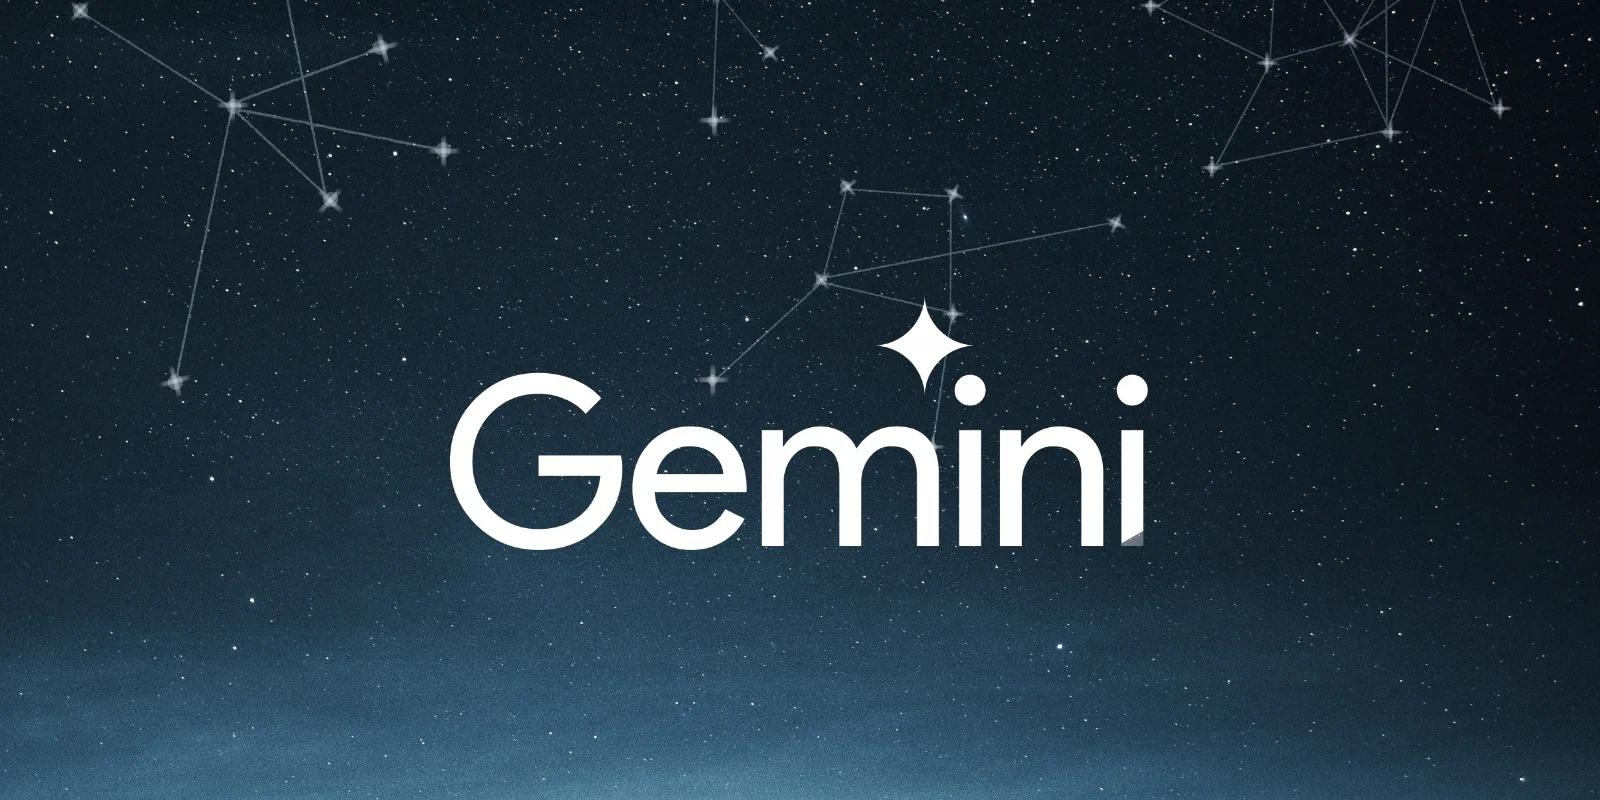 Google launches gemini AI, boost your productivity and creativity